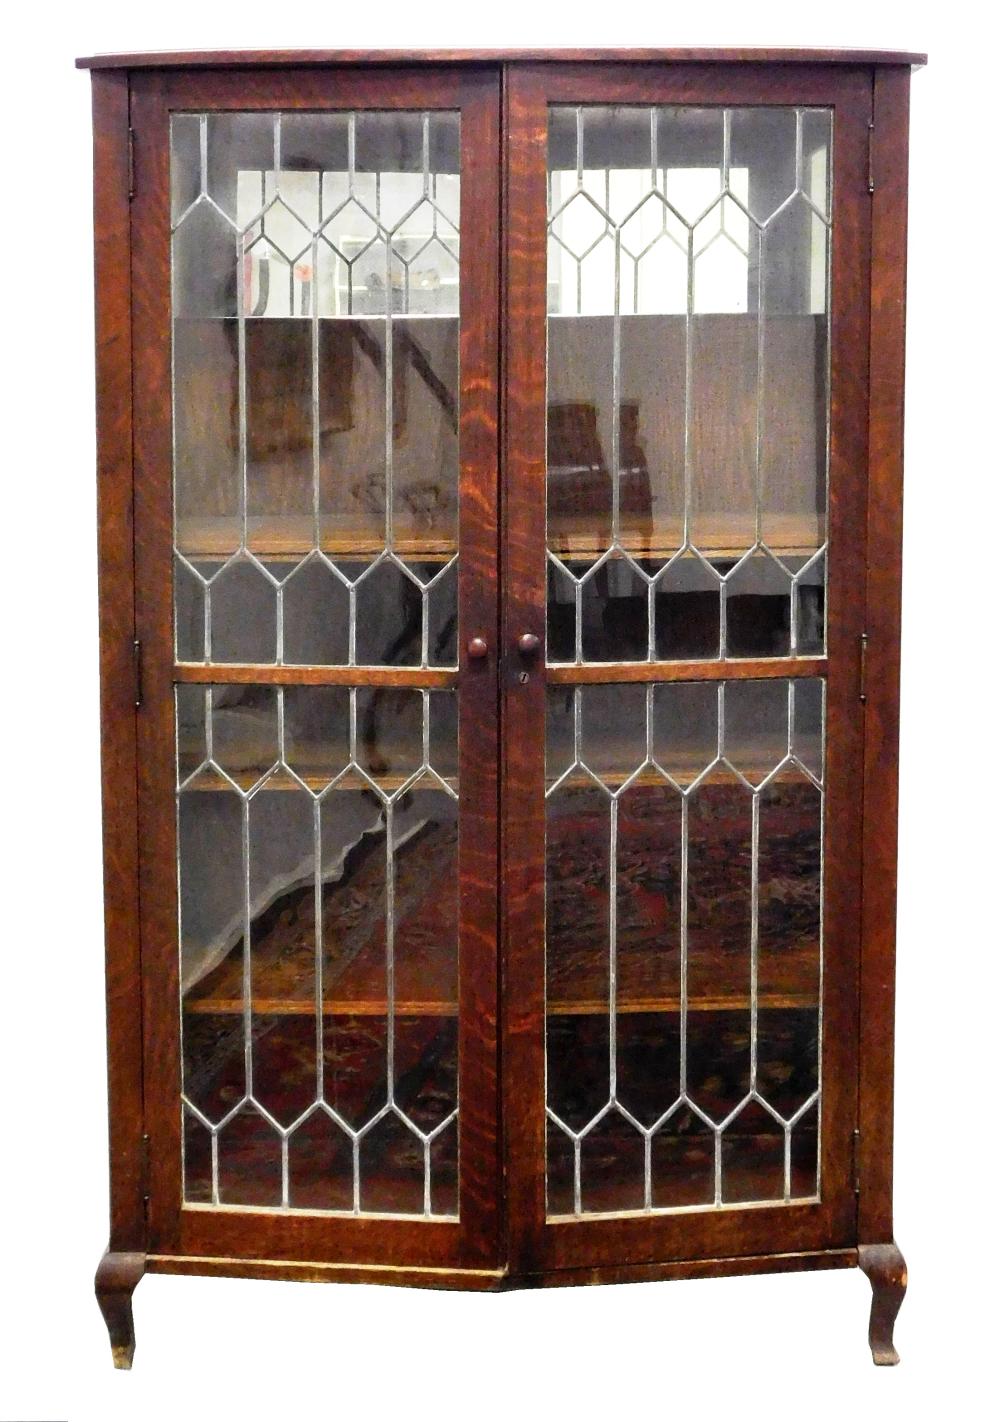 BOOKCASE, OAK WITH LEADED GLASS